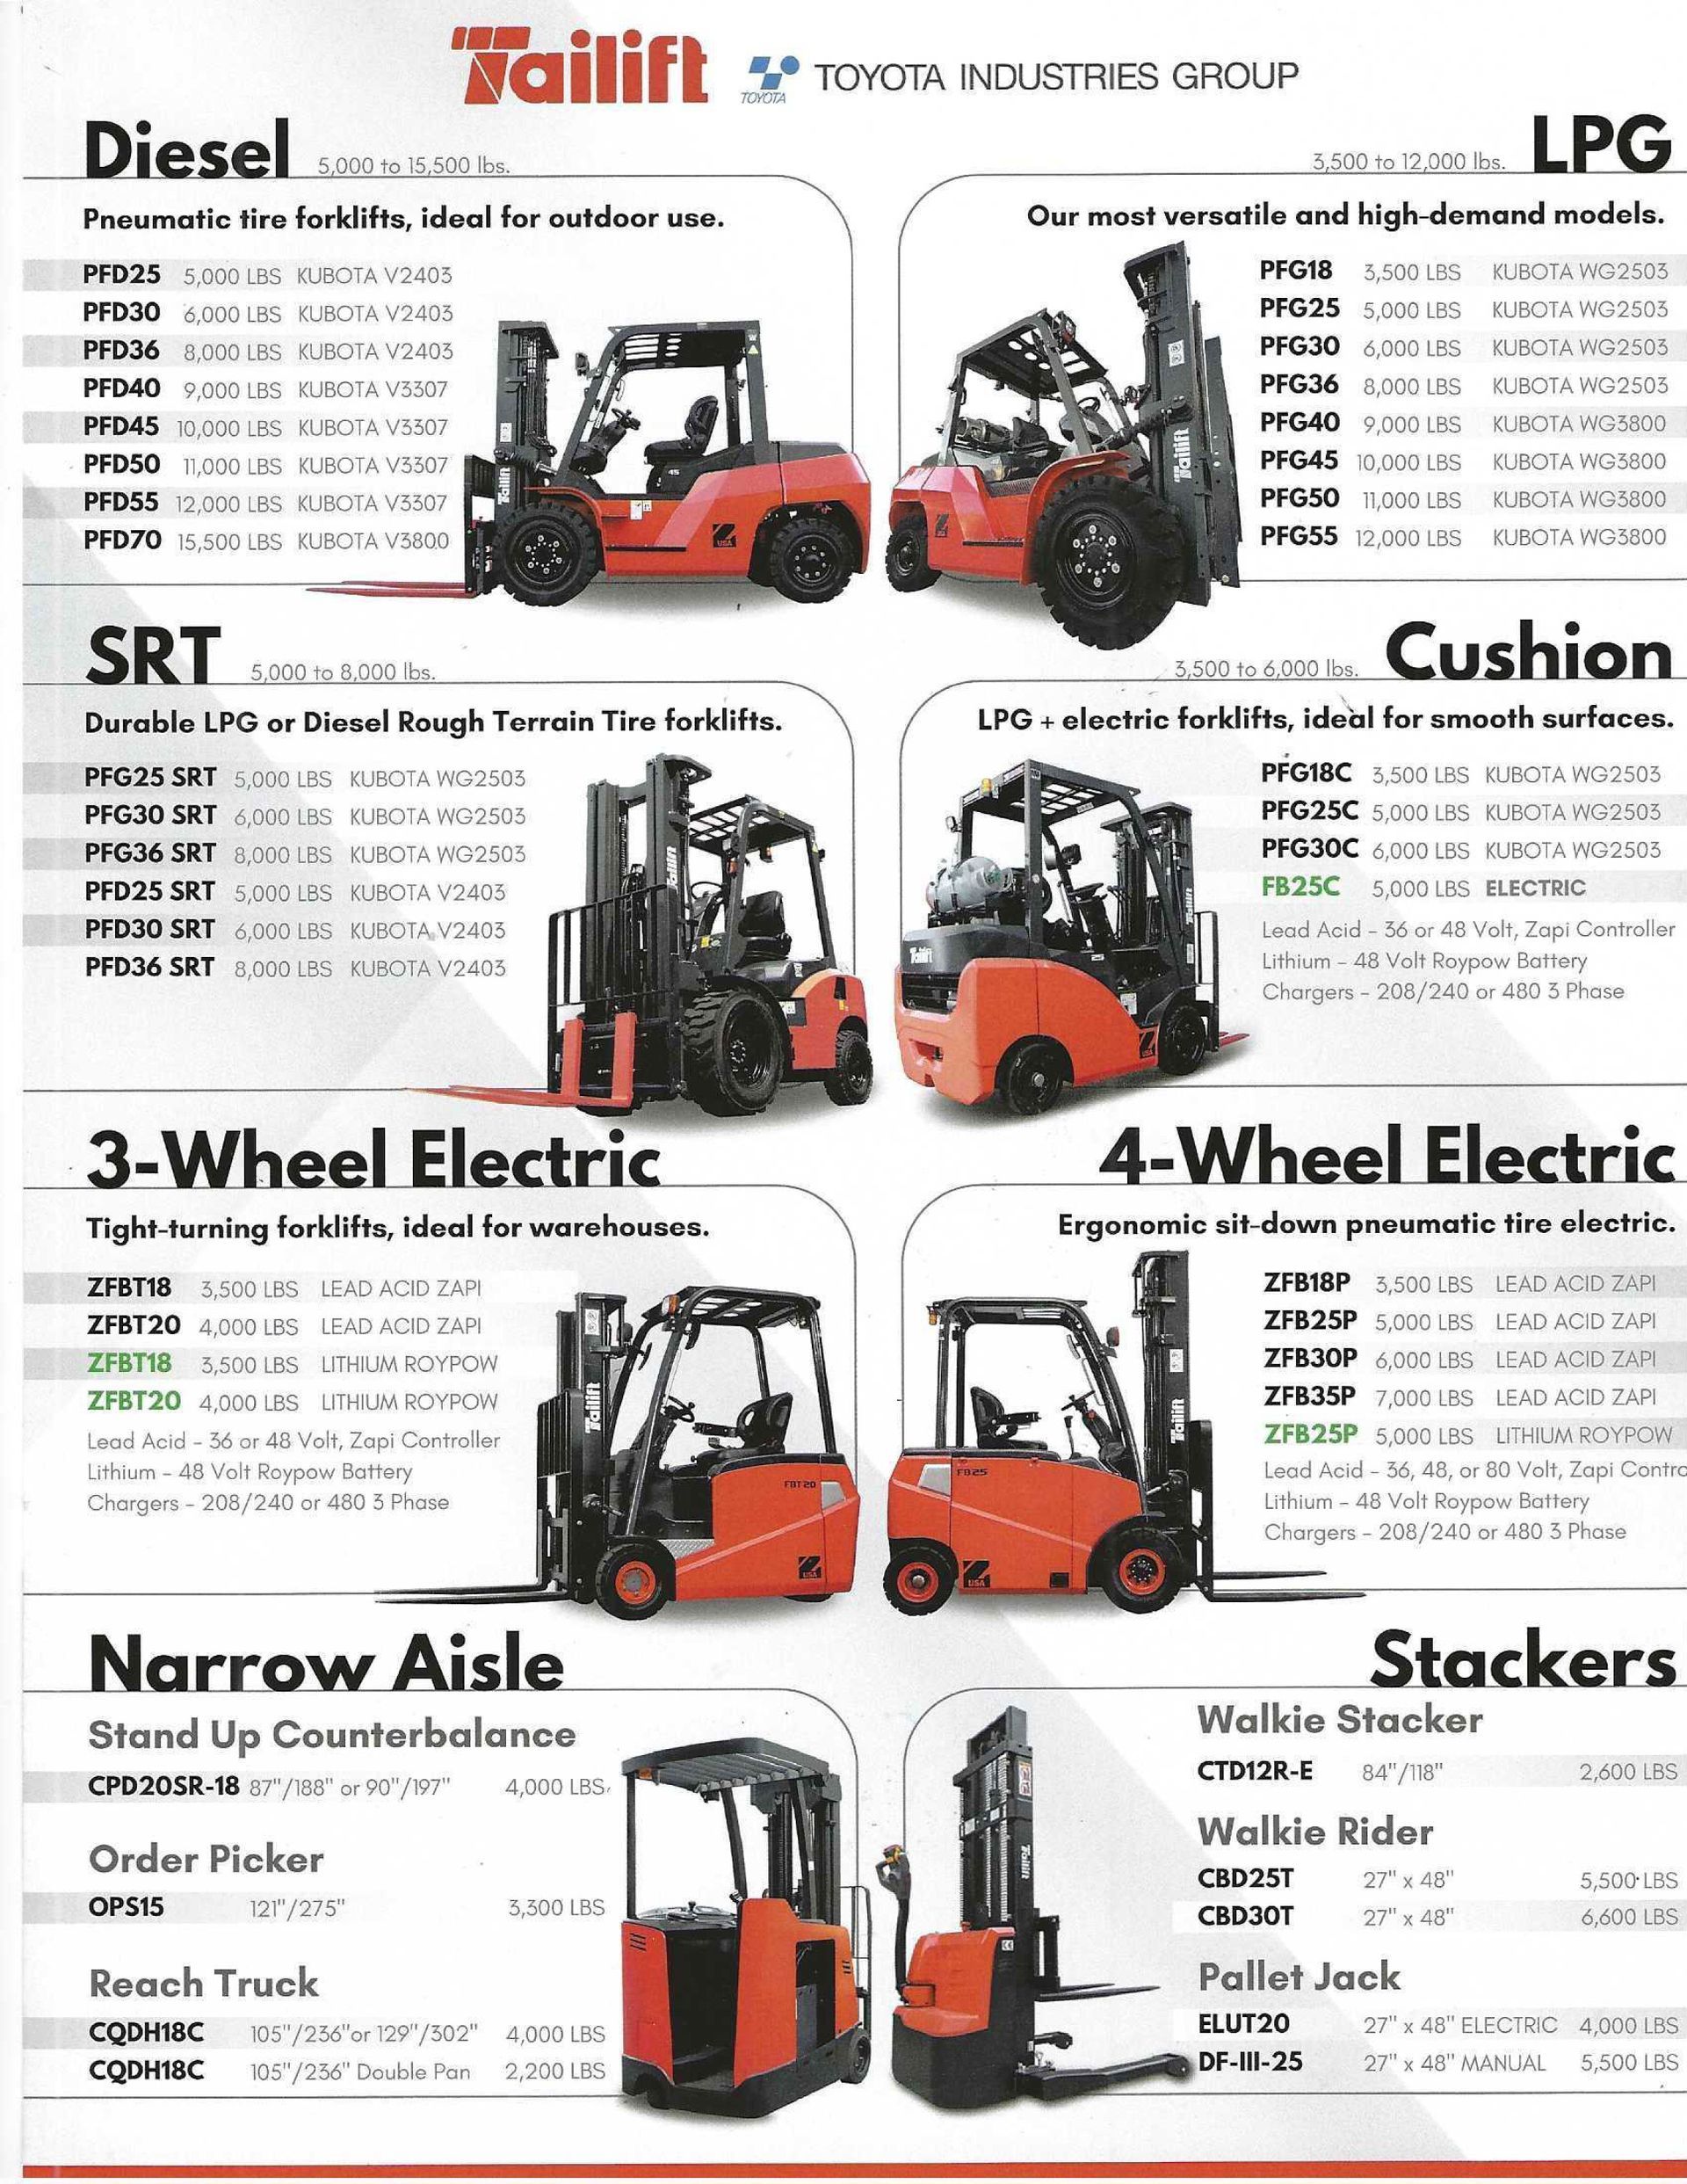 Tailift forklifts